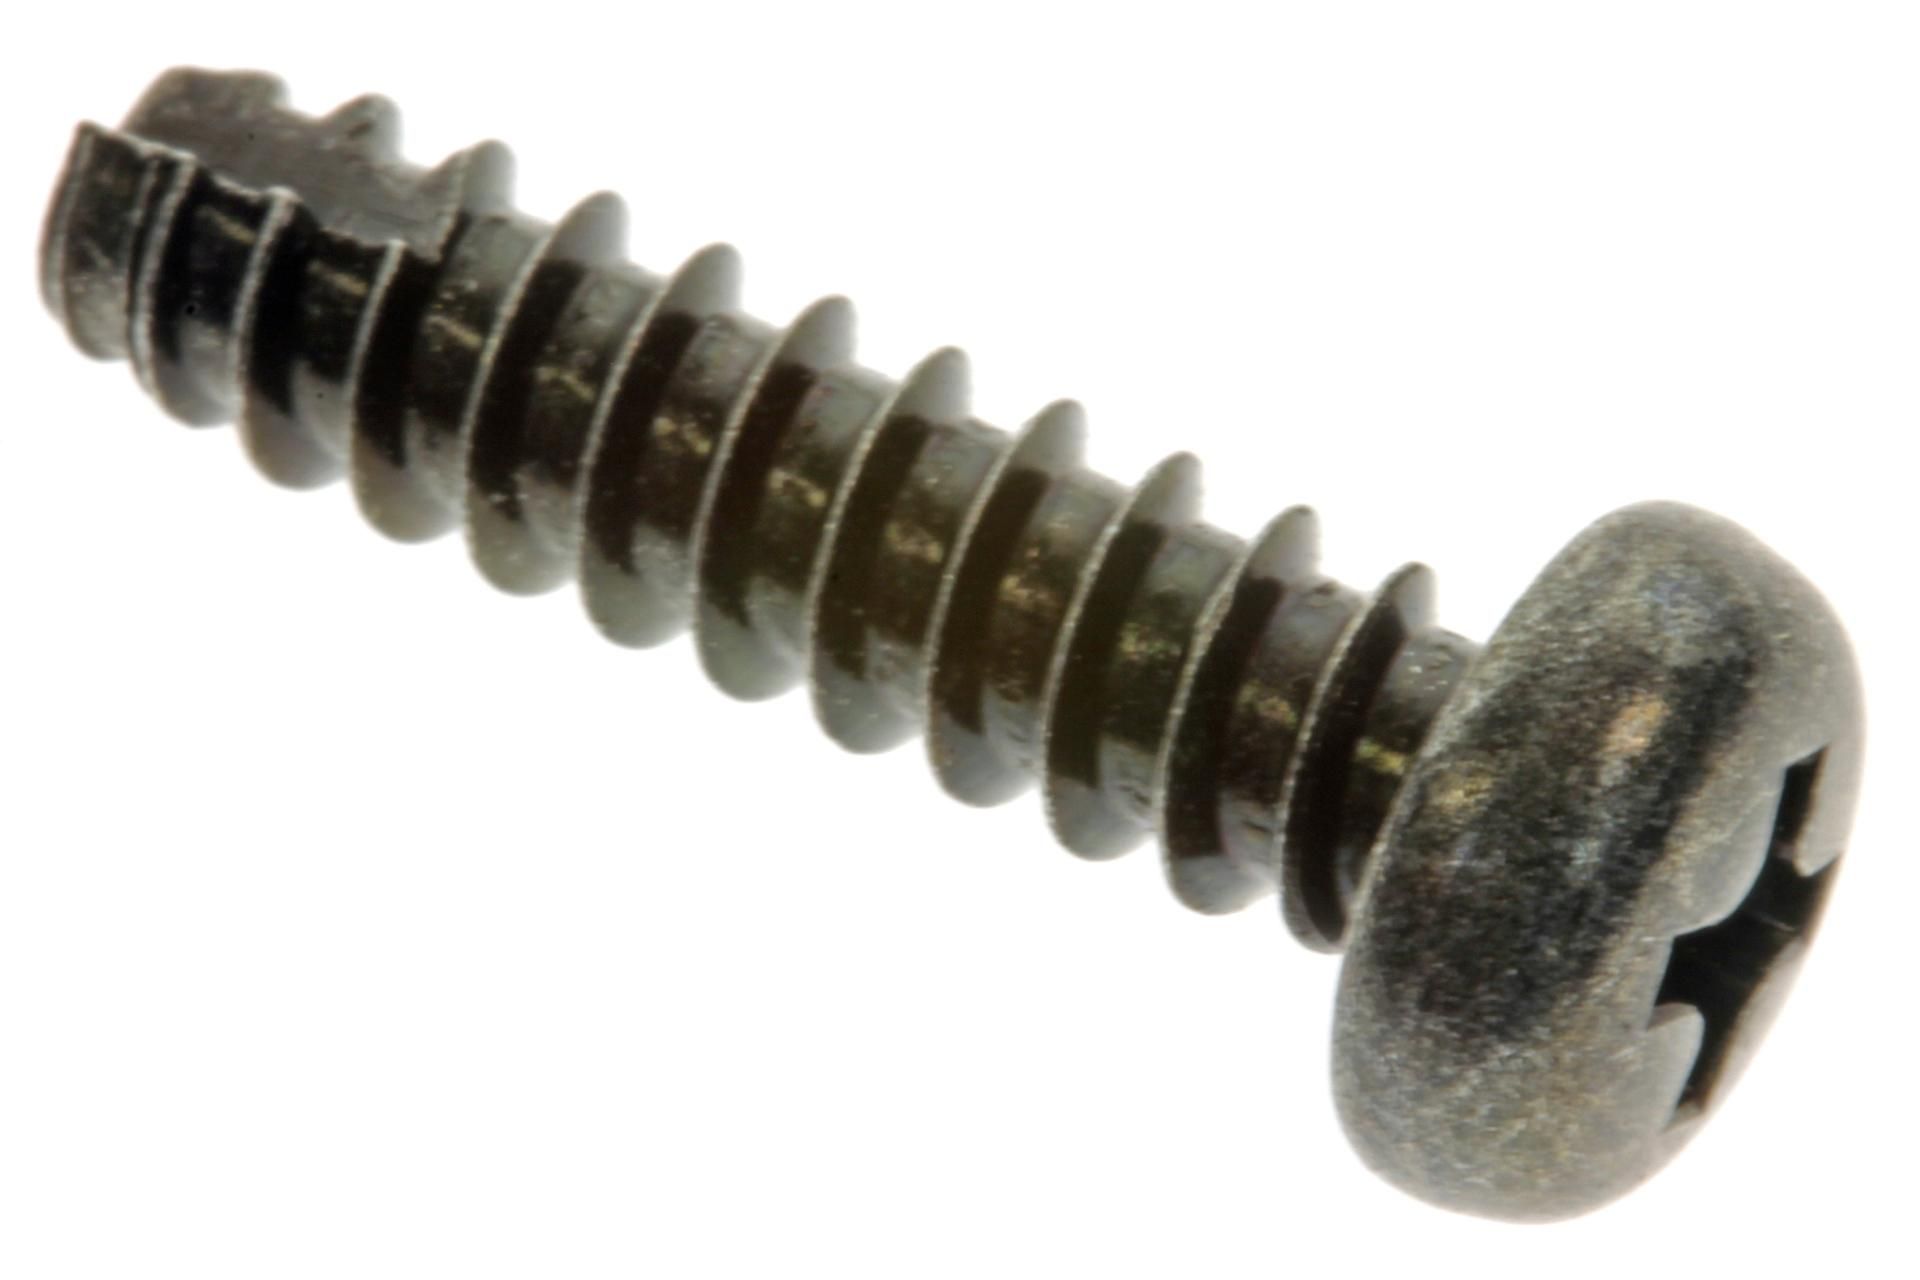 97707-50520-00 Superseded by 97707-50620-00 - SCREW, TRUSS